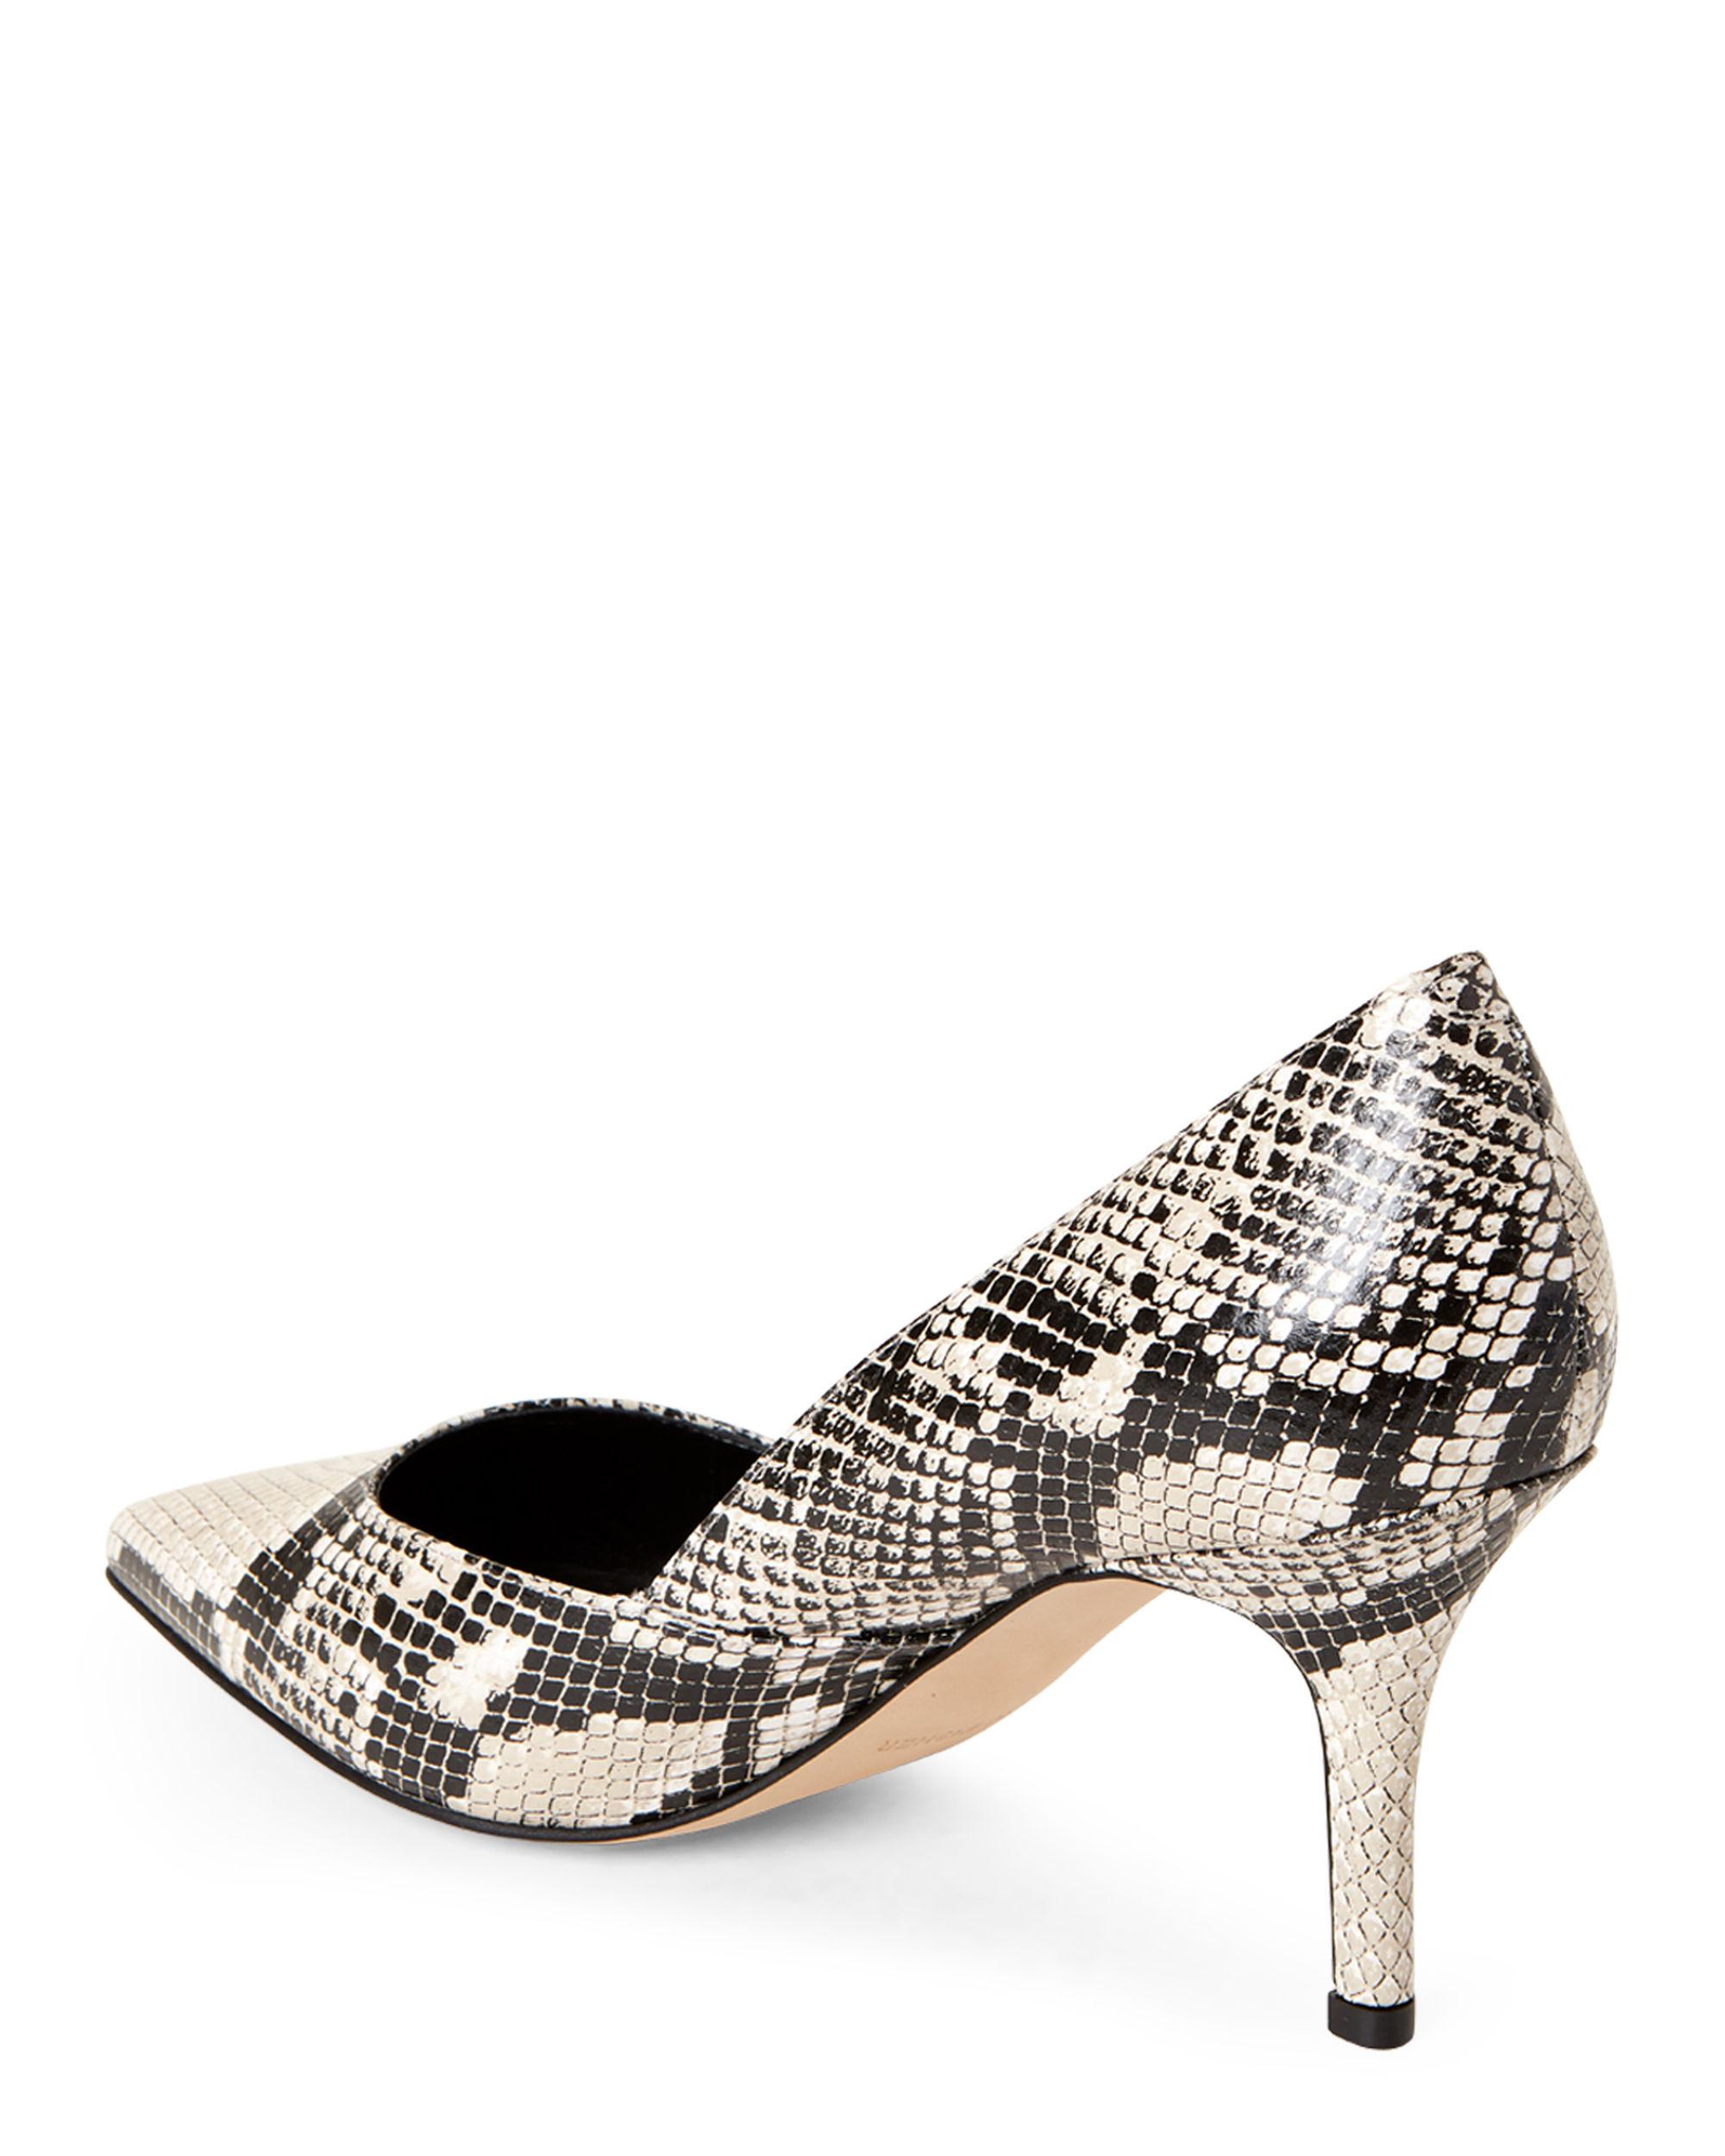 Marc Fisher Snake Tuscany Printed Pumps in Black - Lyst